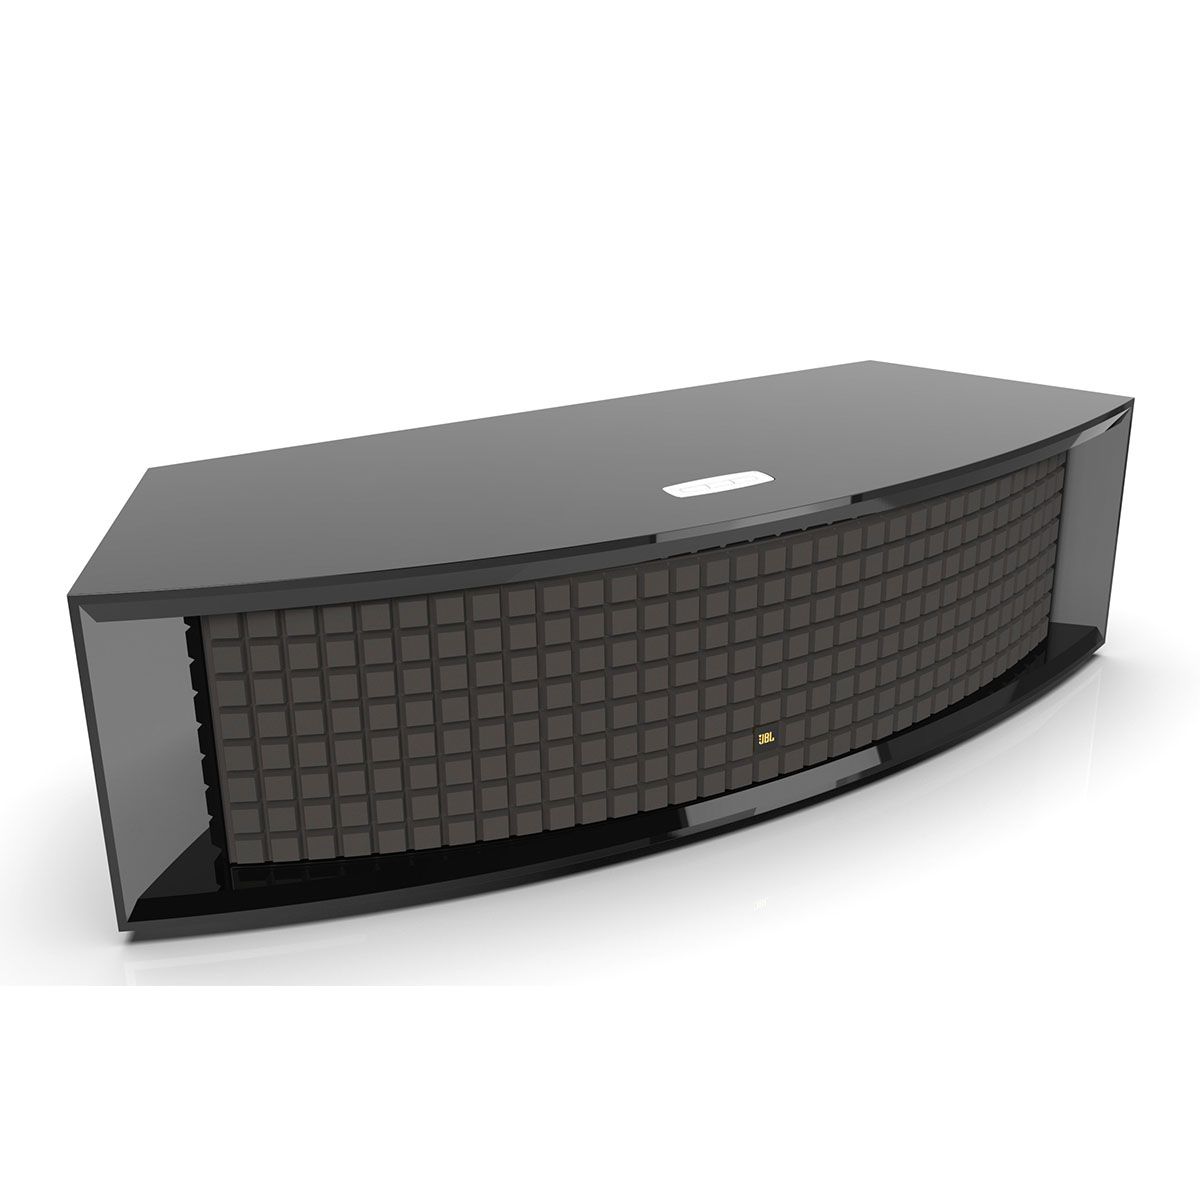 JBL L75 Music System - Limited Edition Gloss Black angled front view with grille